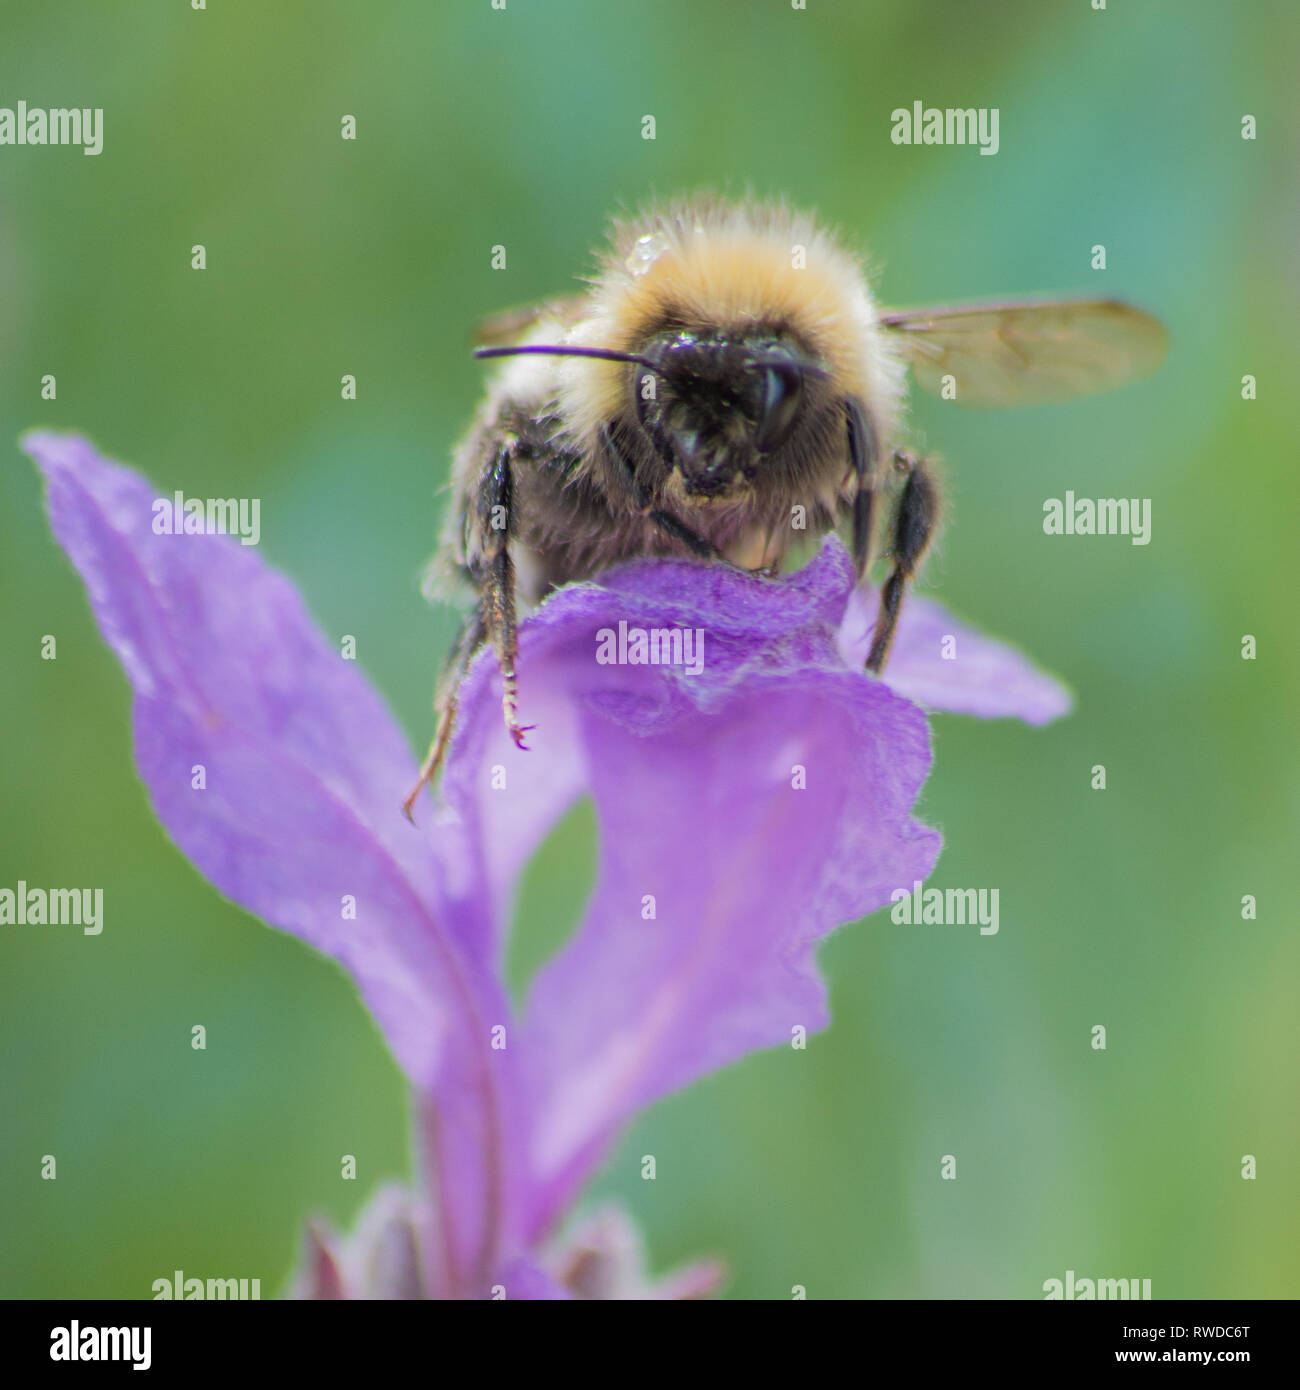 Bumble bee buzzing around and collecting nectar from flowers. Stock Photo